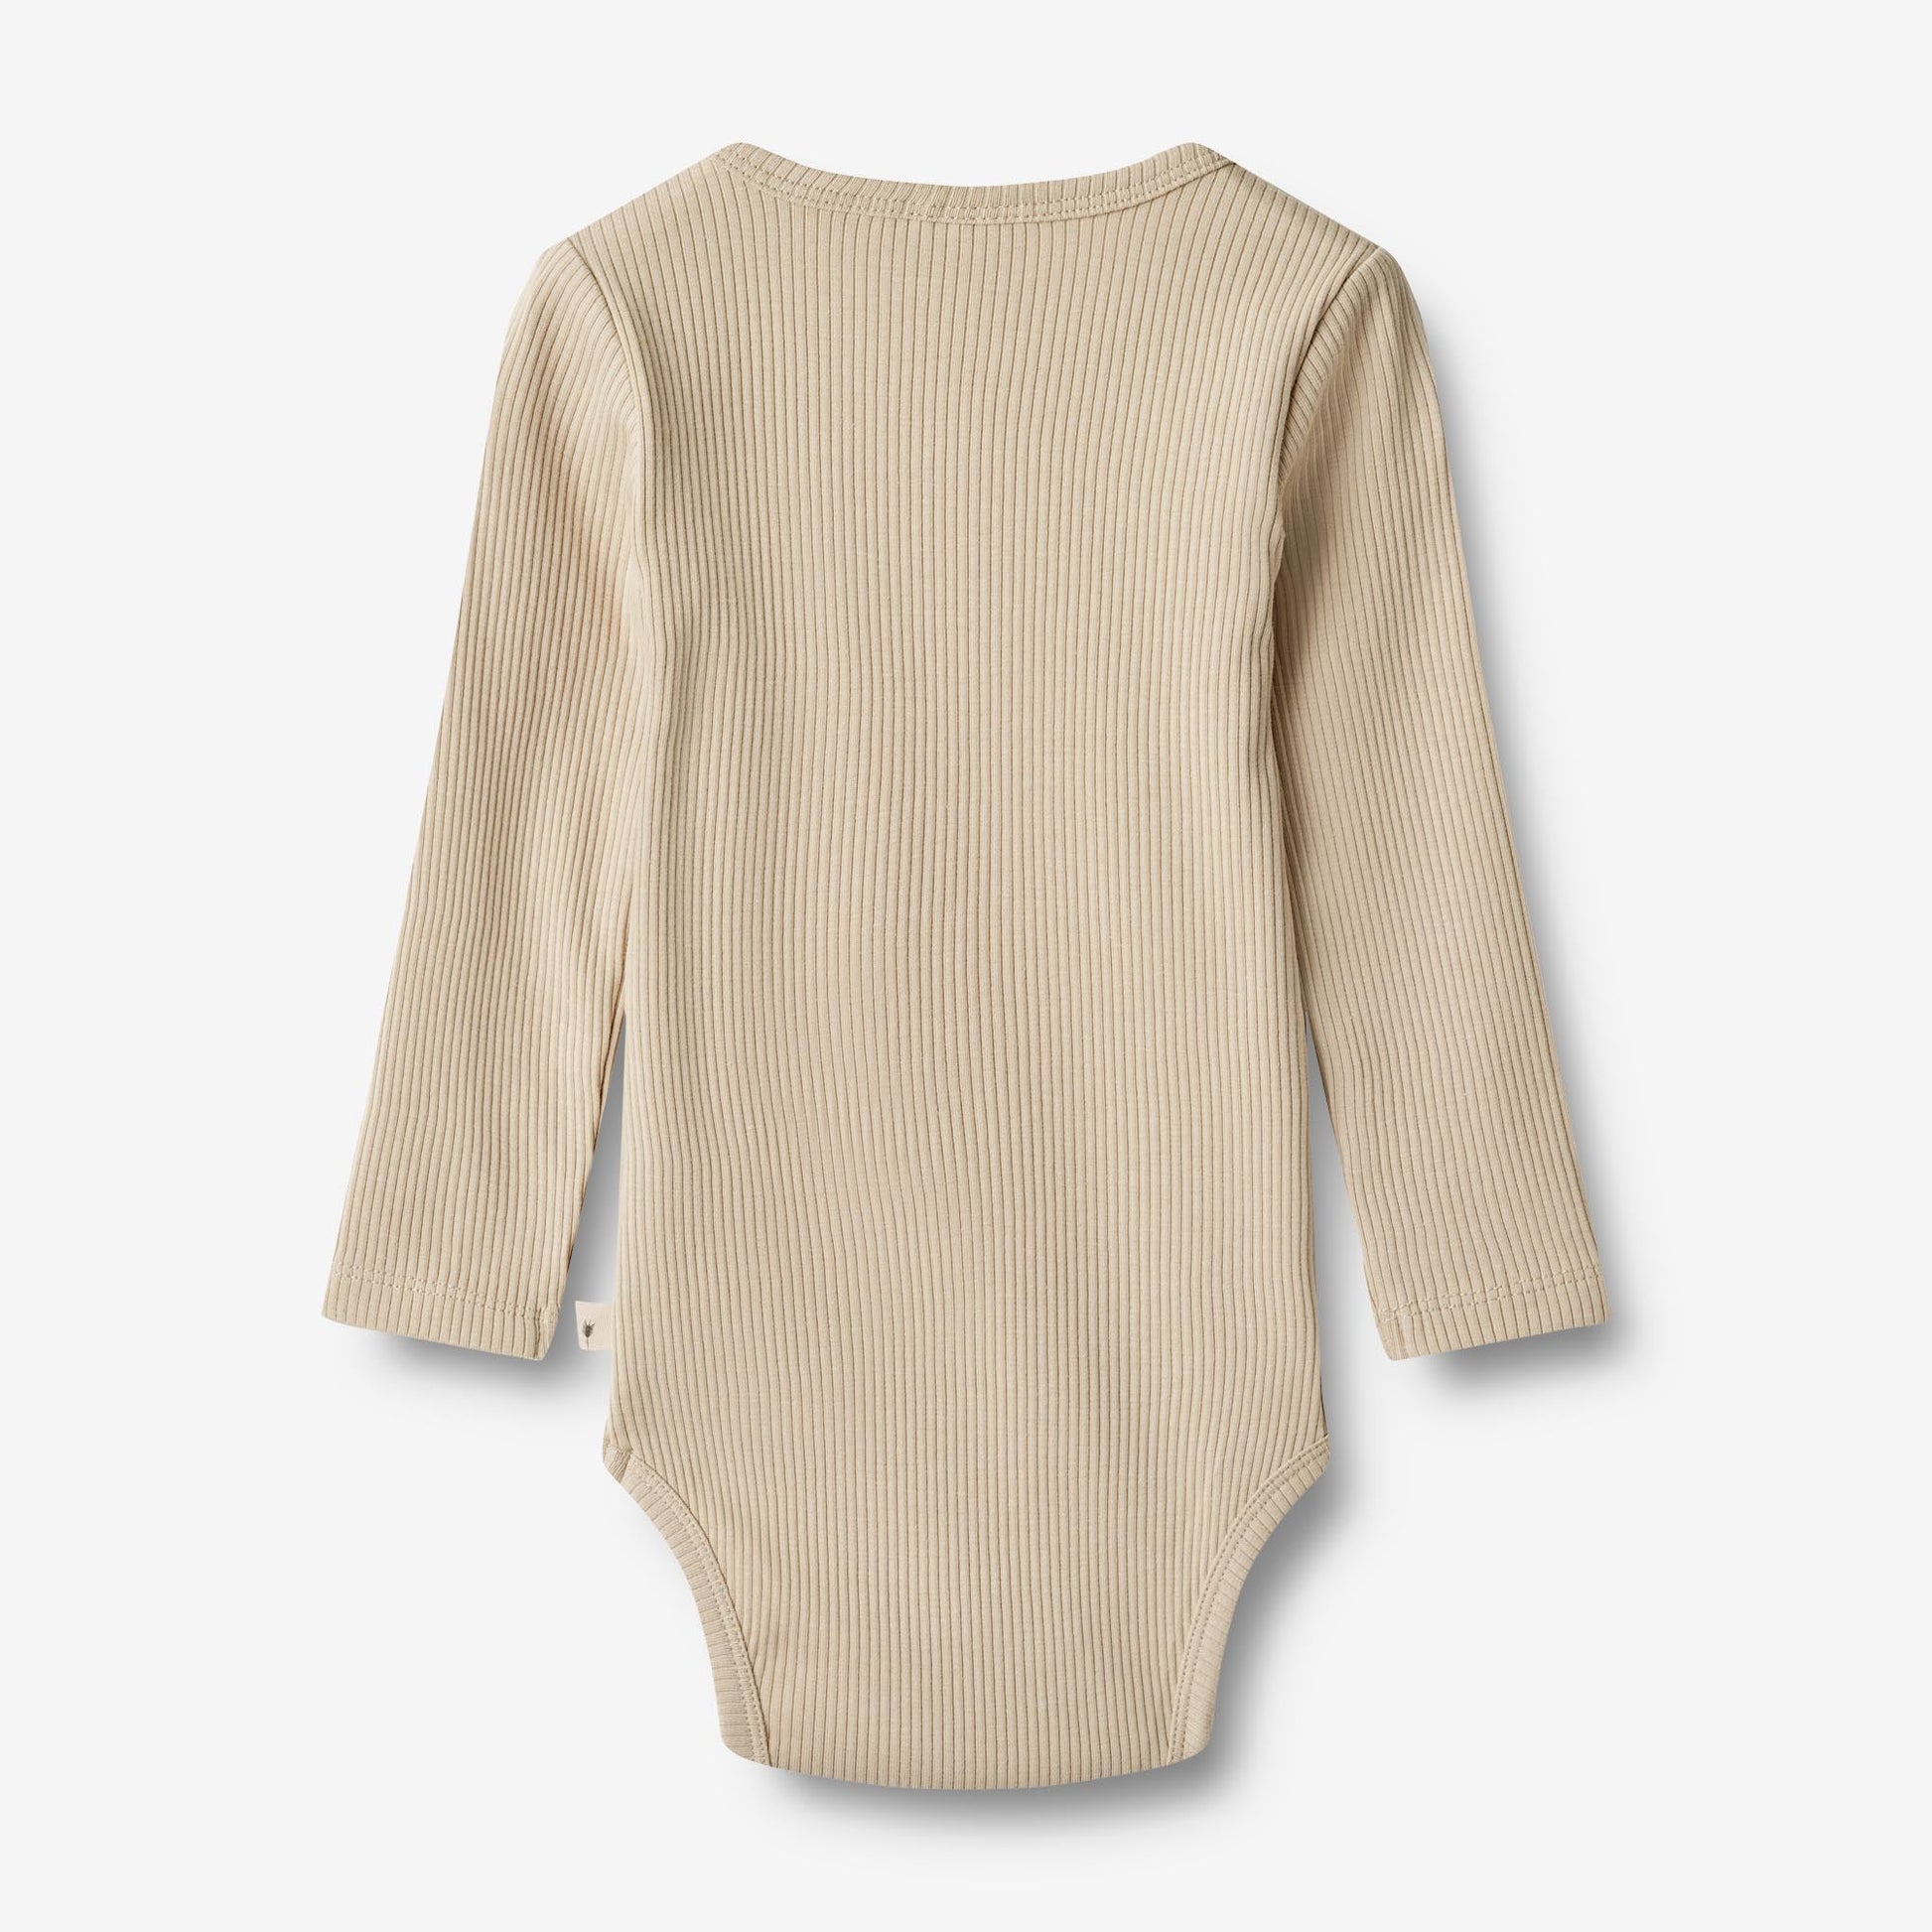 Wheat 'Spencer' L/S Rib Baby Body - Feather Grey